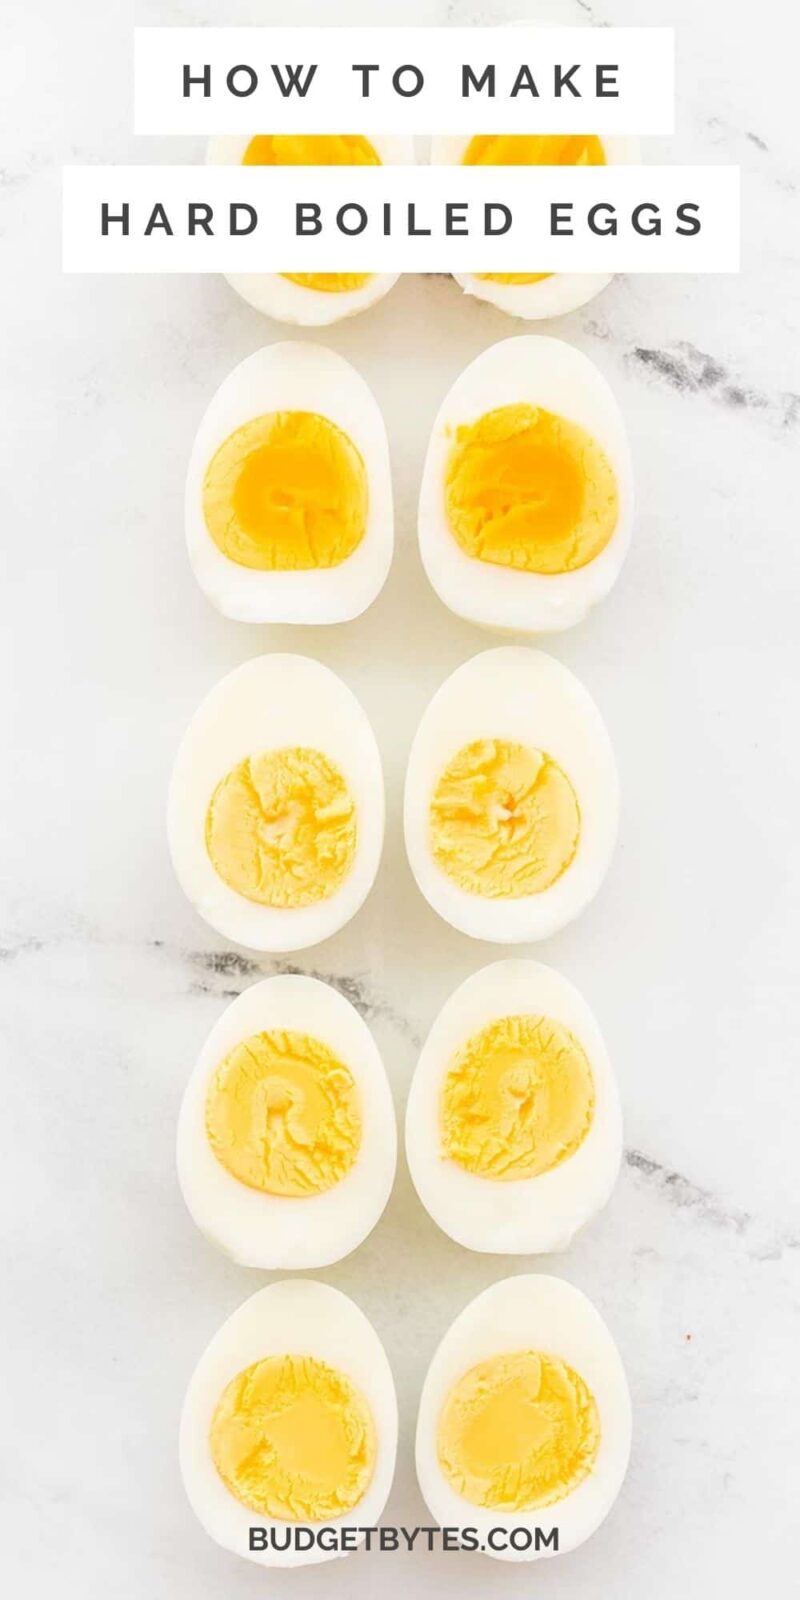 lineup of boiled eggs from softest to hardest, title text at the top